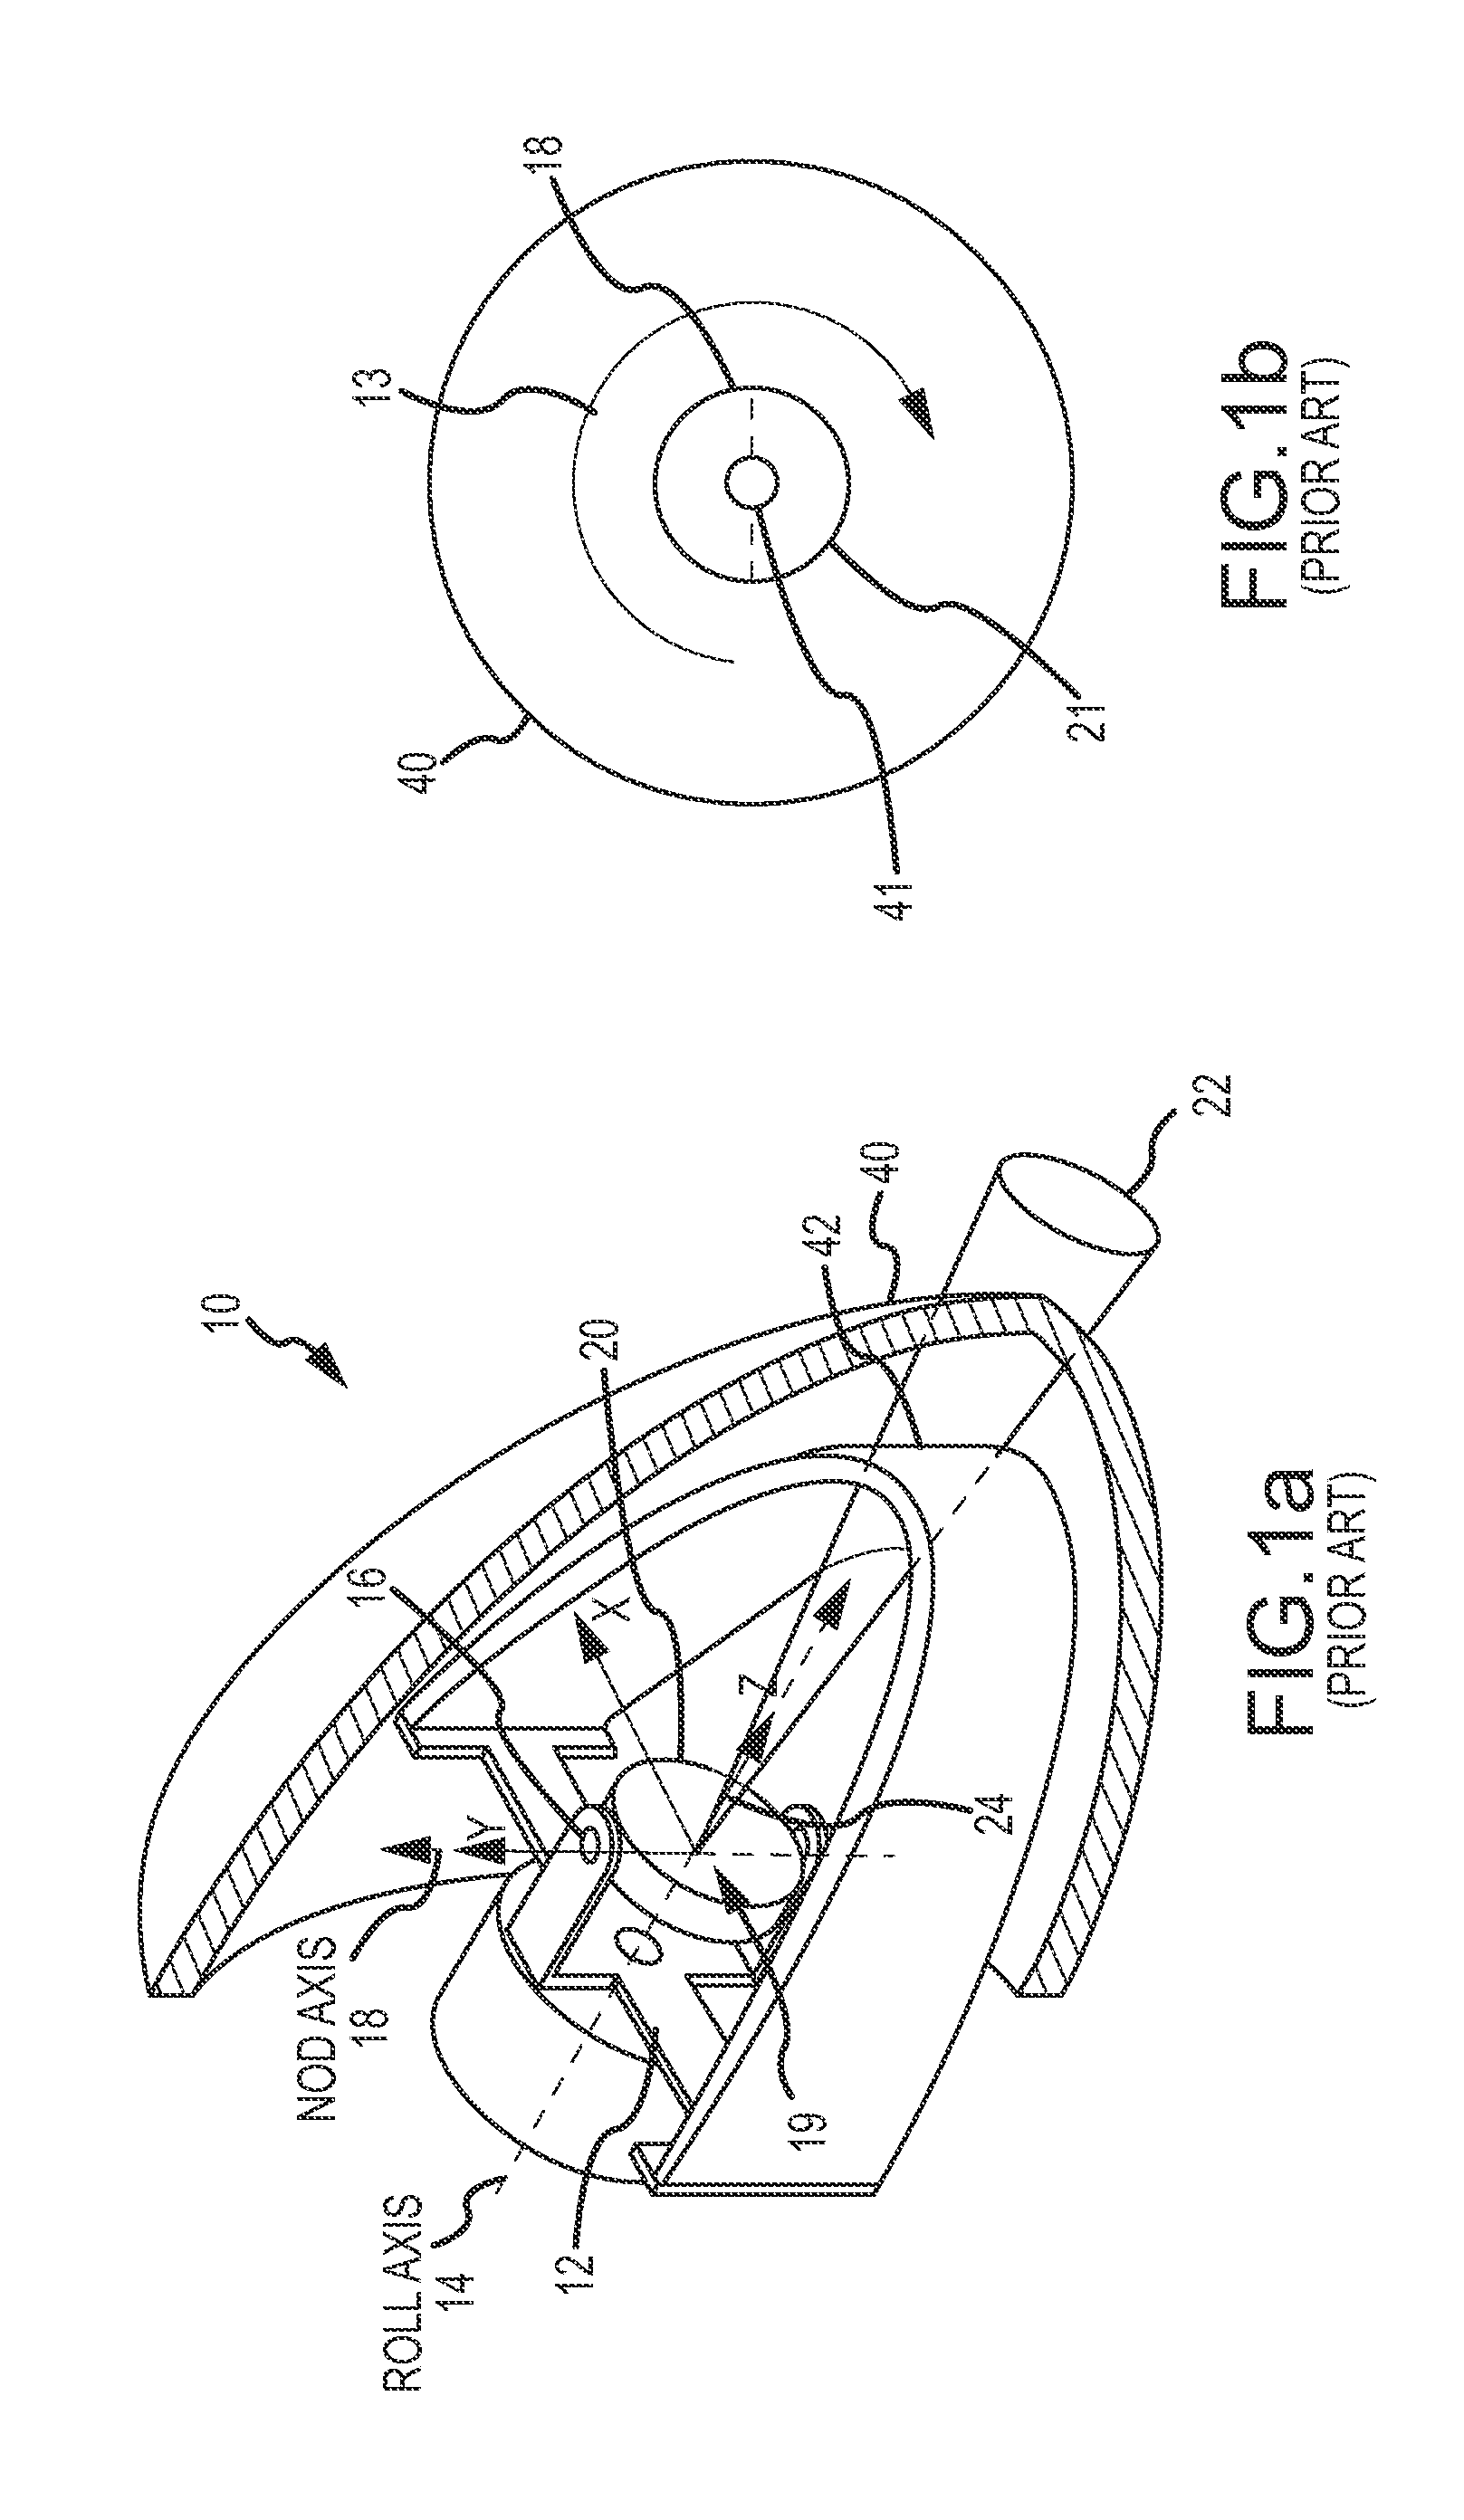 Offset aperture gimbaled optical system with optically corrected conformal dome